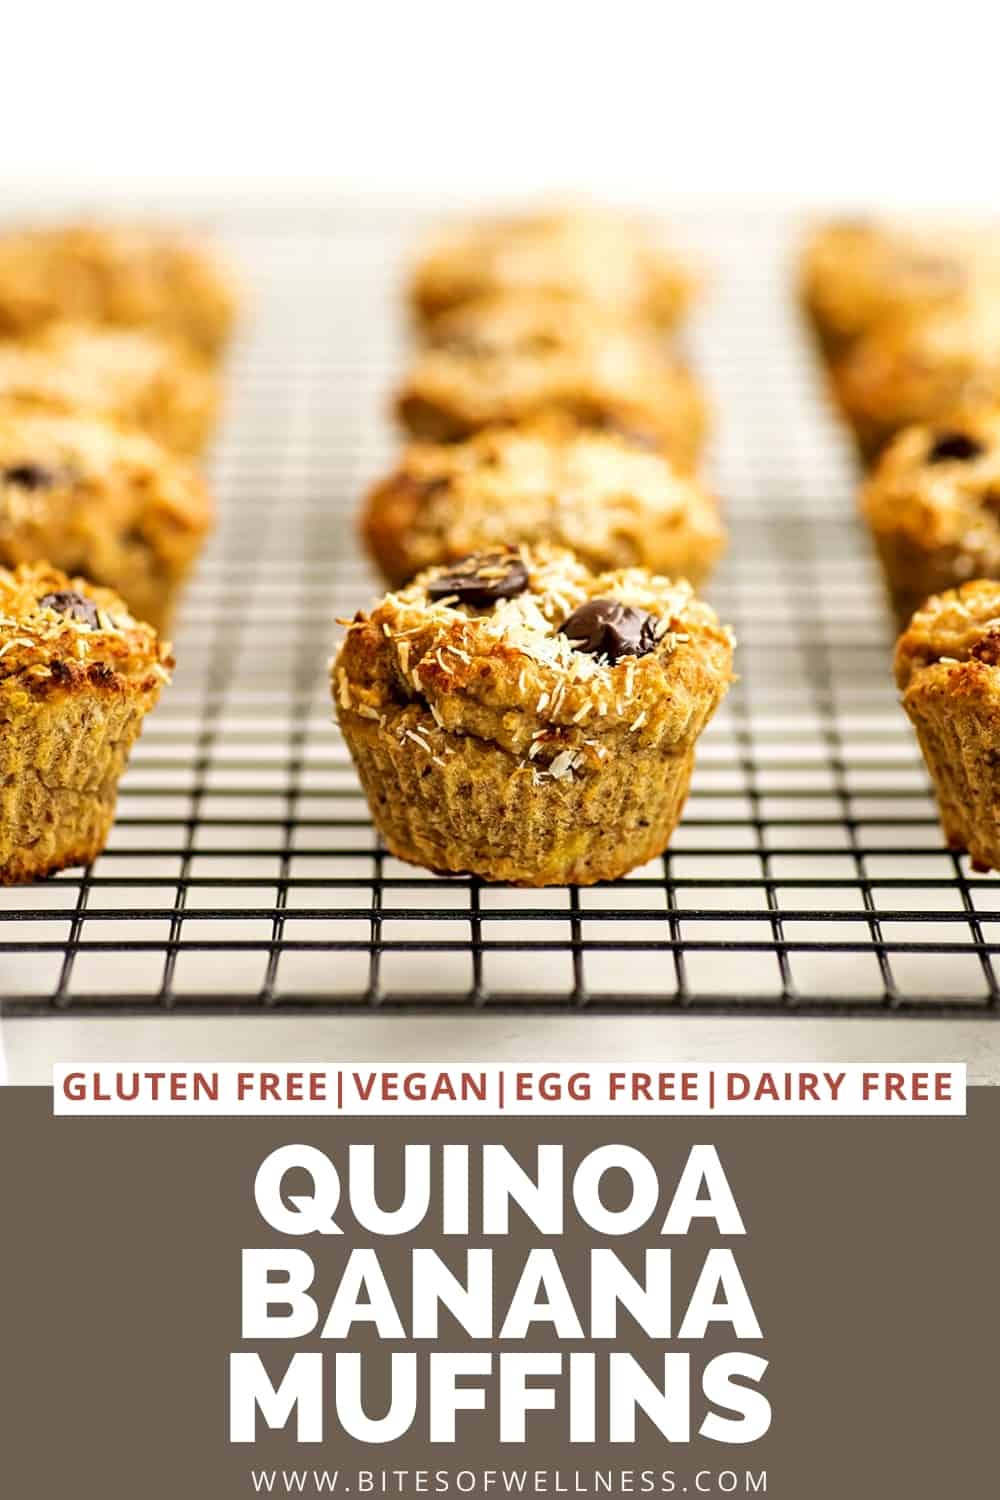 Quinoa banana muffins cooling on a wire cooling rack.